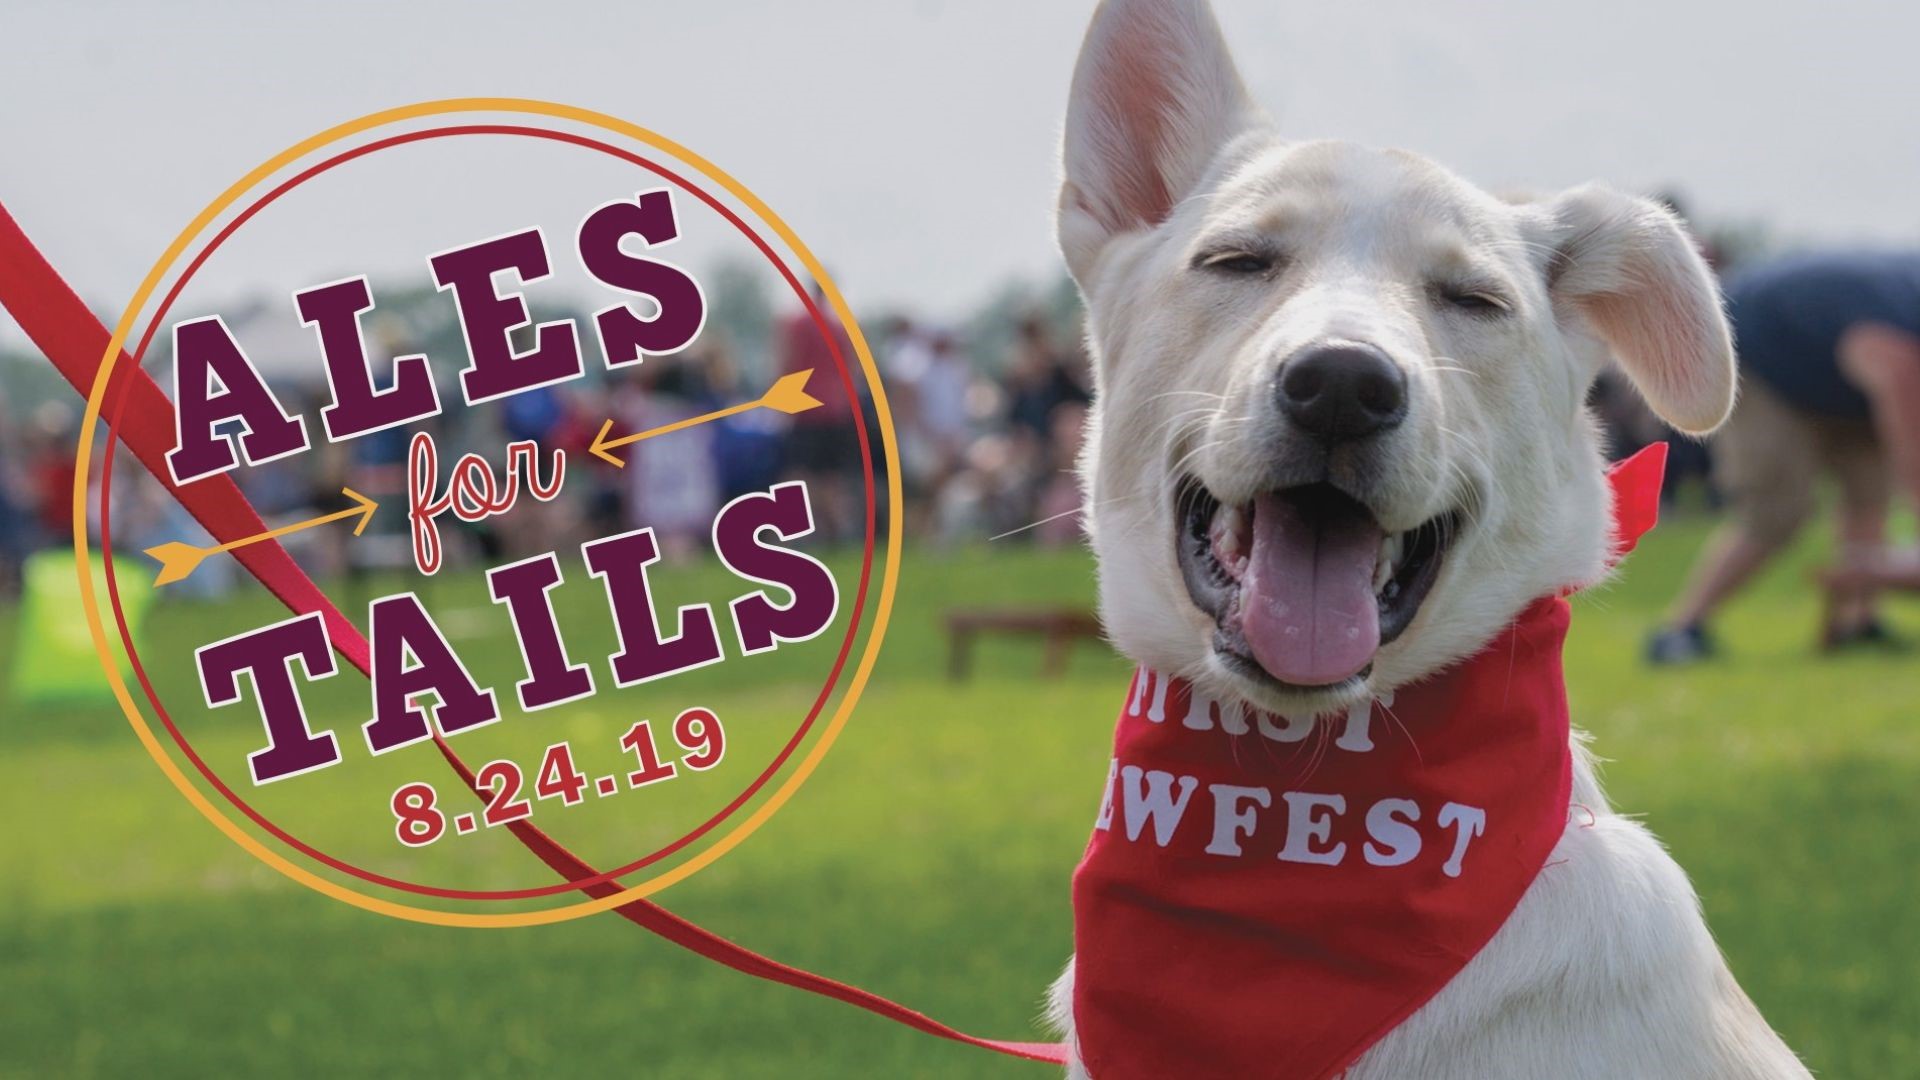 The Animal Refuge League of Greater Portland's annual Ales for Tails event is Saturday at Thompson's Point.